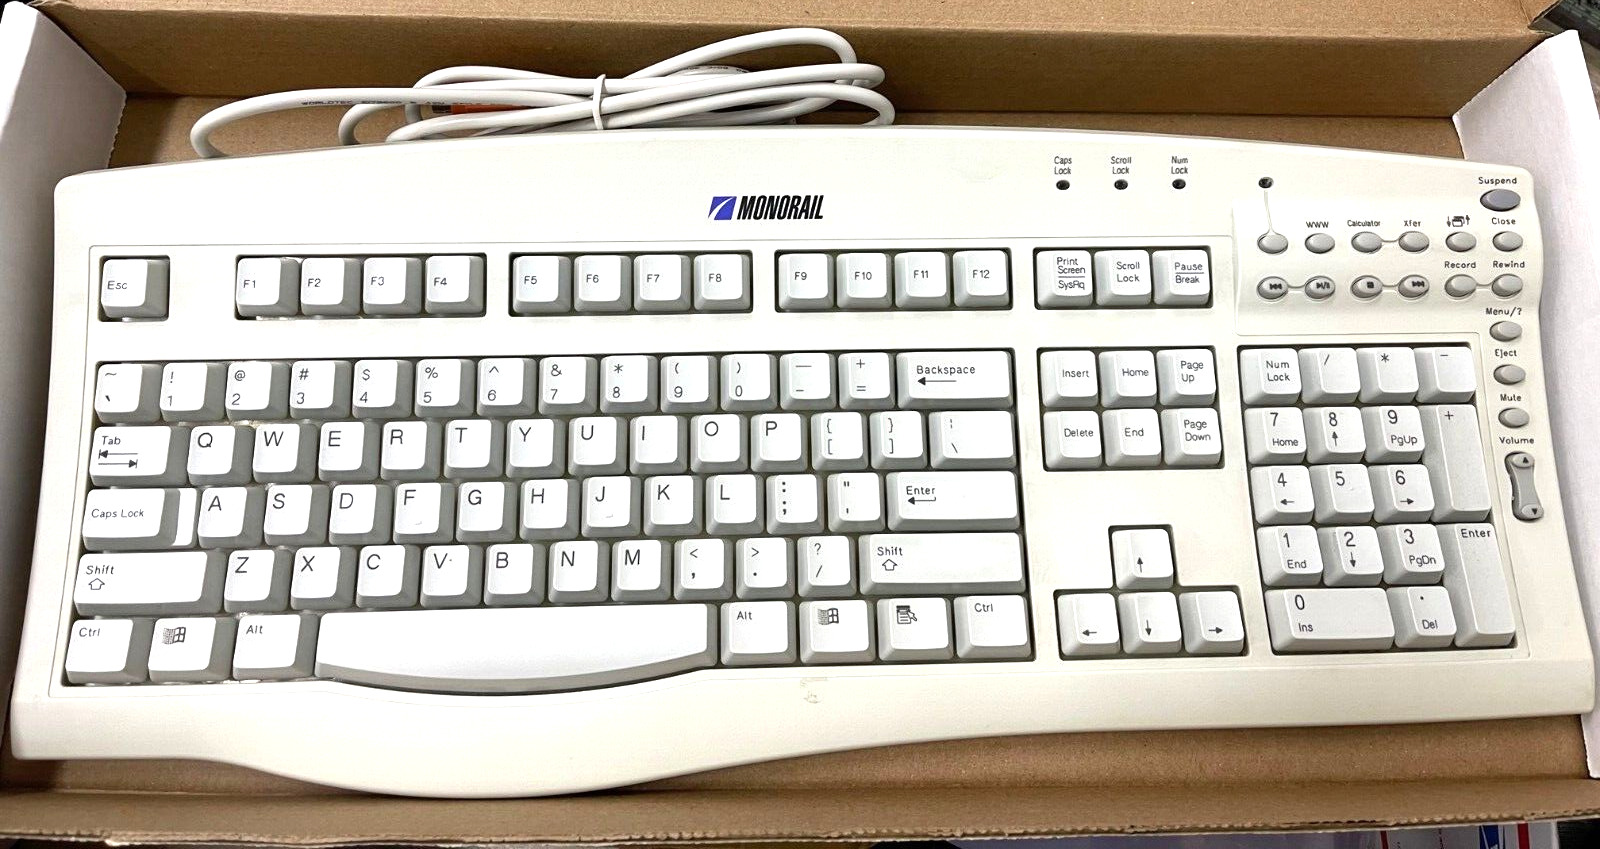 RARE VINTAGE MONORAIL SK-2500 PS2 WINDOWS KEYBOARD WITH CD SOFTWARE US-RM0-KBRK